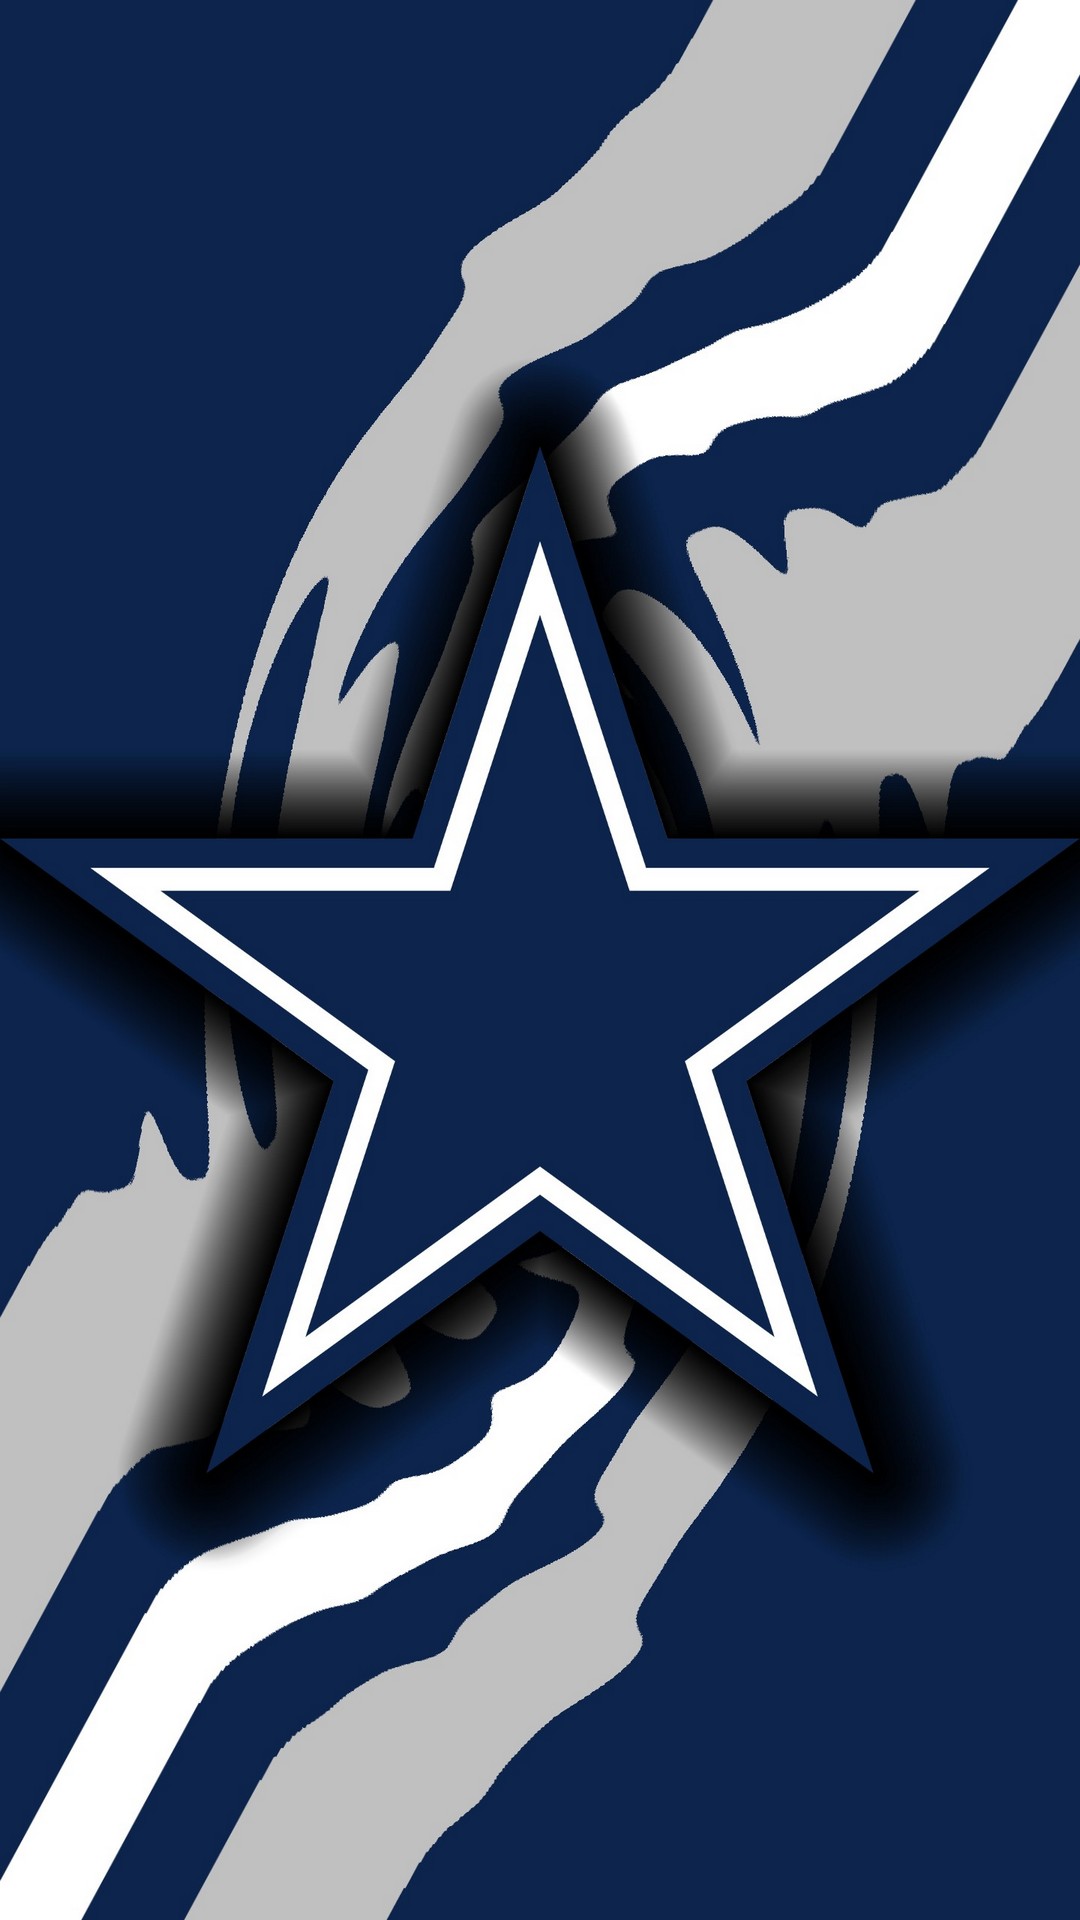 Dallas Cowboys iPhone 7 Wallpaper with high-resolution 1080x1920 pixel. Download and set as wallpaper for Apple iPhone X, XS Max, XR, 8, 7, 6, SE, iPad, Android